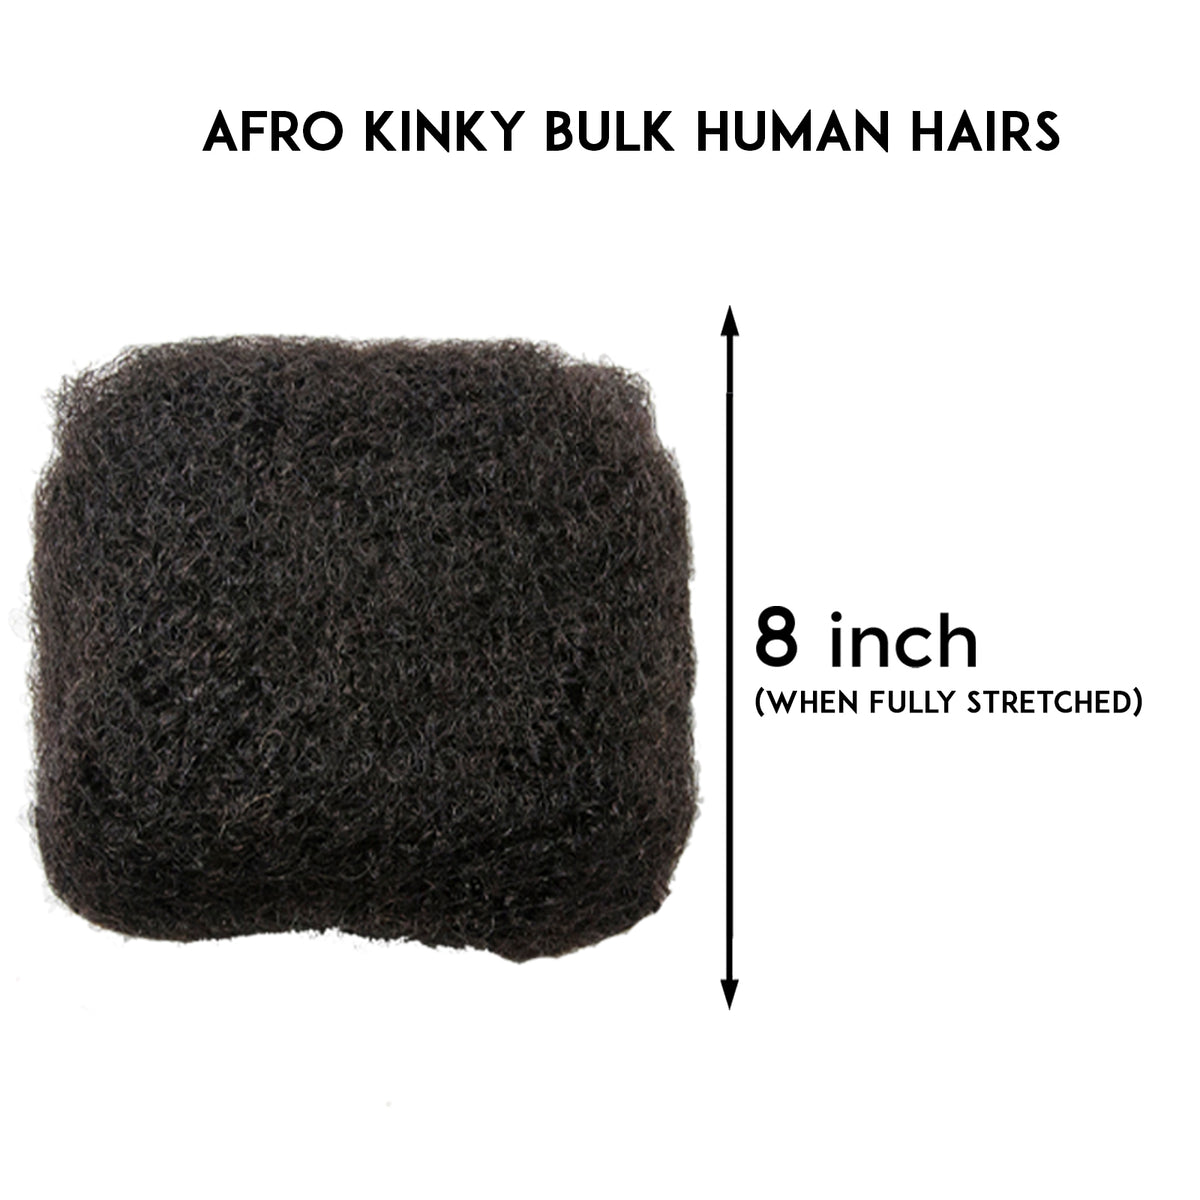 Afro Kinky Human Hairs For Making,Repairing & Bulking Locs 8 Inch Long Afro Kinky Bulk Human Hair For Dreadlock Extensions 100% Natural Afro Hairs For Twisting & Braiding 29g/1Oz (Natural Black,8Inch)